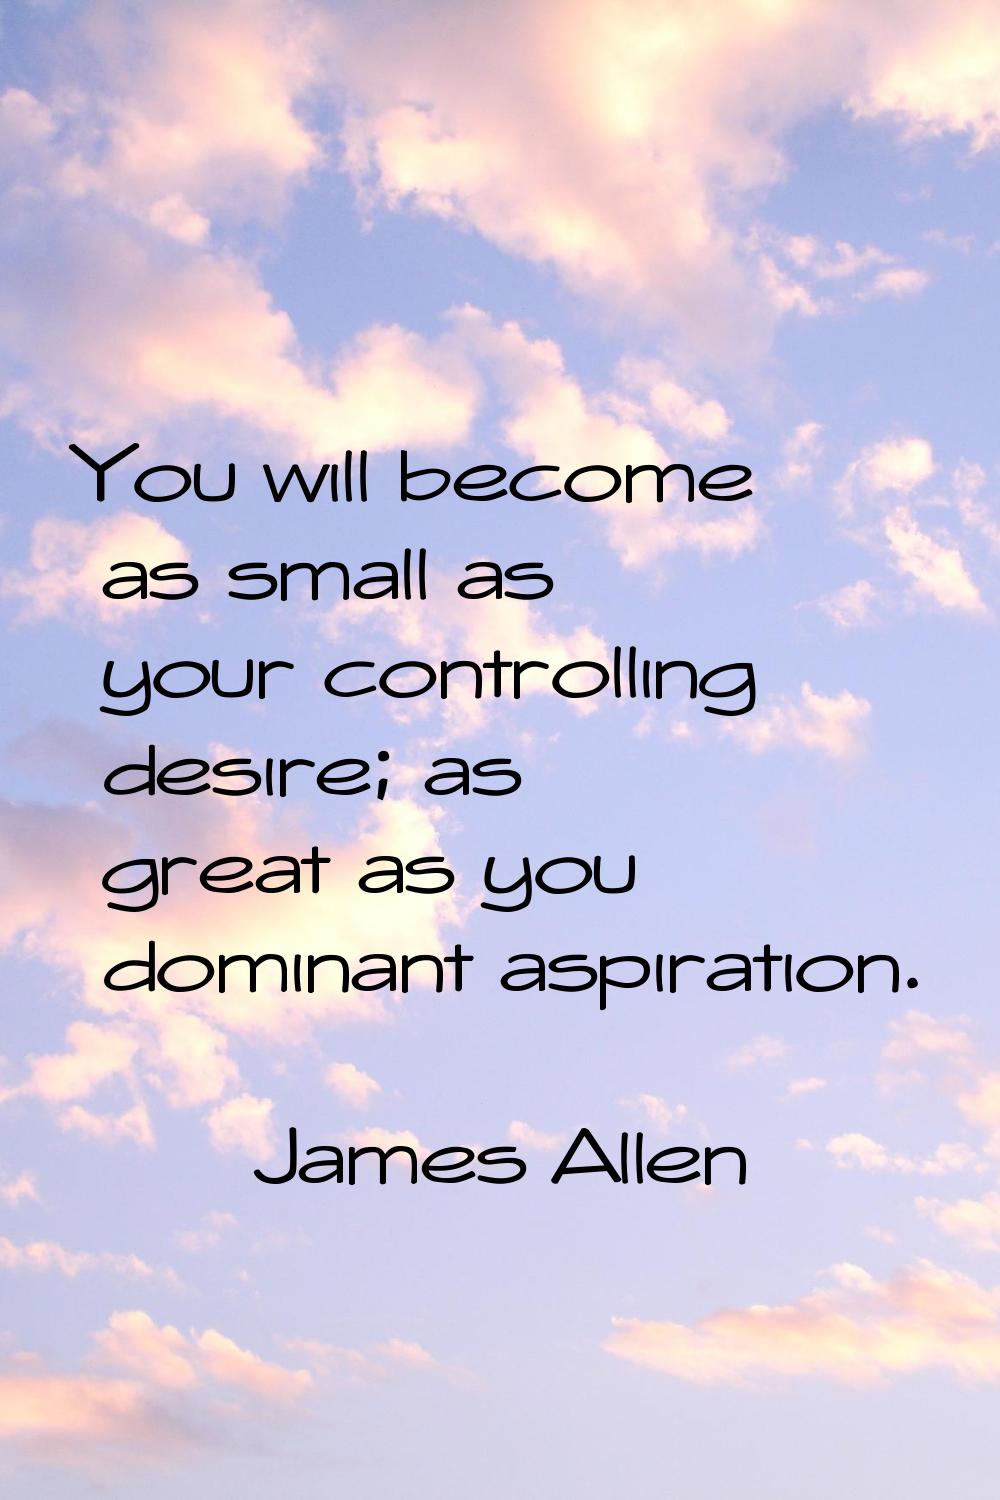 You will become as small as your controlling desire; as great as you dominant aspiration.